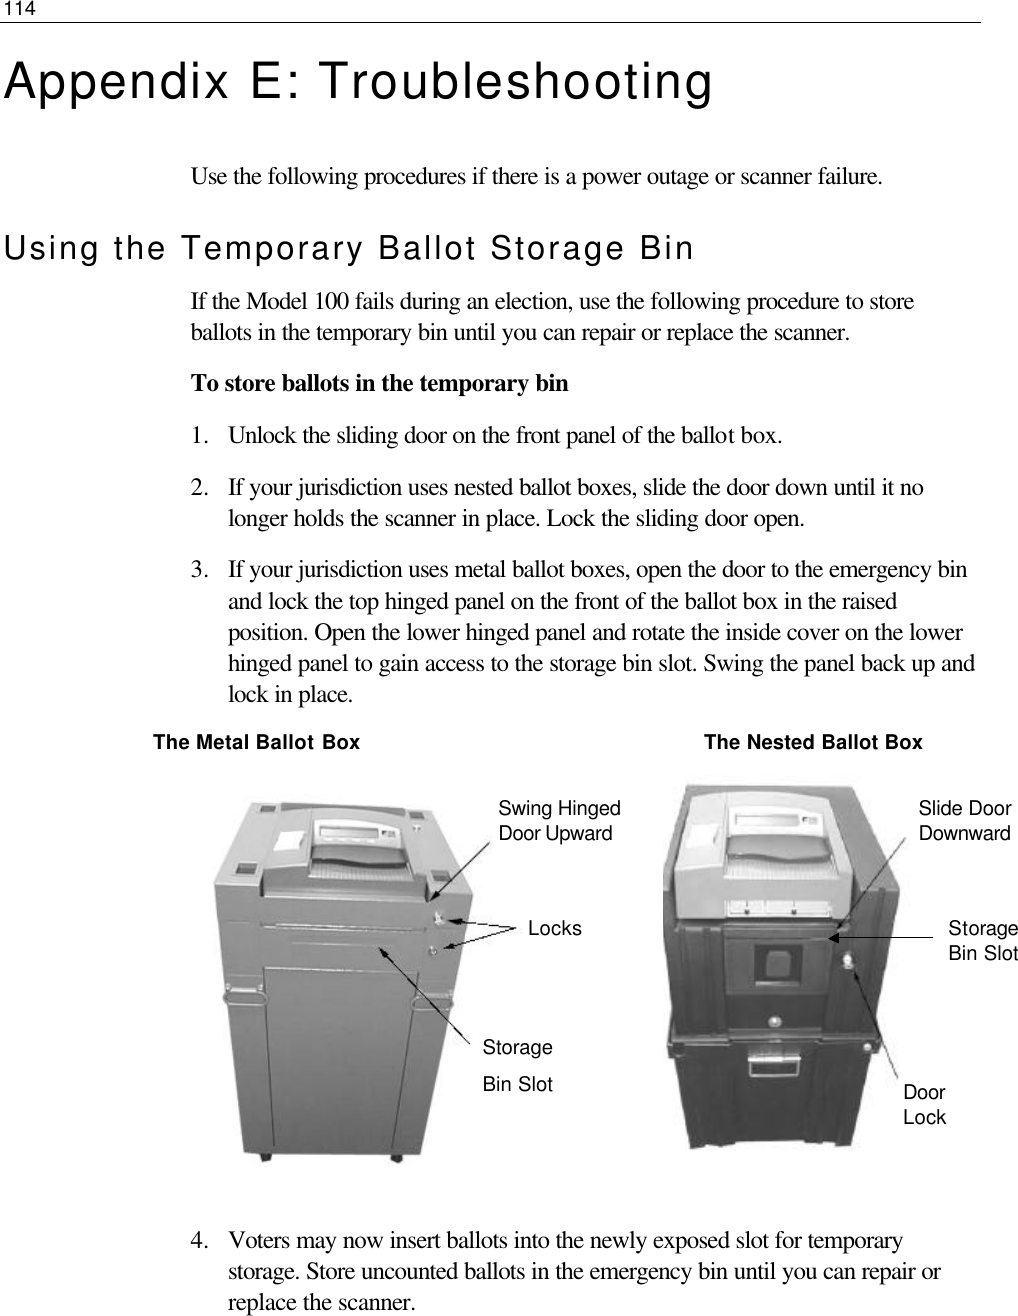 114  Appendix E: Troubleshooting Use the following procedures if there is a power outage or scanner failure. Using the Temporary Ballot Storage Bin If the Model 100 fails during an election, use the following procedure to store ballots in the temporary bin until you can repair or replace the scanner. To store ballots in the temporary bin 1.  Unlock the sliding door on the front panel of the ballot box.  2.  If your jurisdiction uses nested ballot boxes, slide the door down until it no longer holds the scanner in place. Lock the sliding door open.  3.  If your jurisdiction uses metal ballot boxes, open the door to the emergency bin and lock the top hinged panel on the front of the ballot box in the raised position. Open the lower hinged panel and rotate the inside cover on the lower hinged panel to gain access to the storage bin slot. Swing the panel back up and lock in place.               The Metal Ballot Box                                                       The Nested Ballot Box           4.  Voters may now insert ballots into the newly exposed slot for temporary storage. Store uncounted ballots in the emergency bin until you can repair or replace the scanner.    Slide Door Downward Storage Bin Slot Door Lock  Swing Hinged Door Upward Locks Storage Bin Slot 